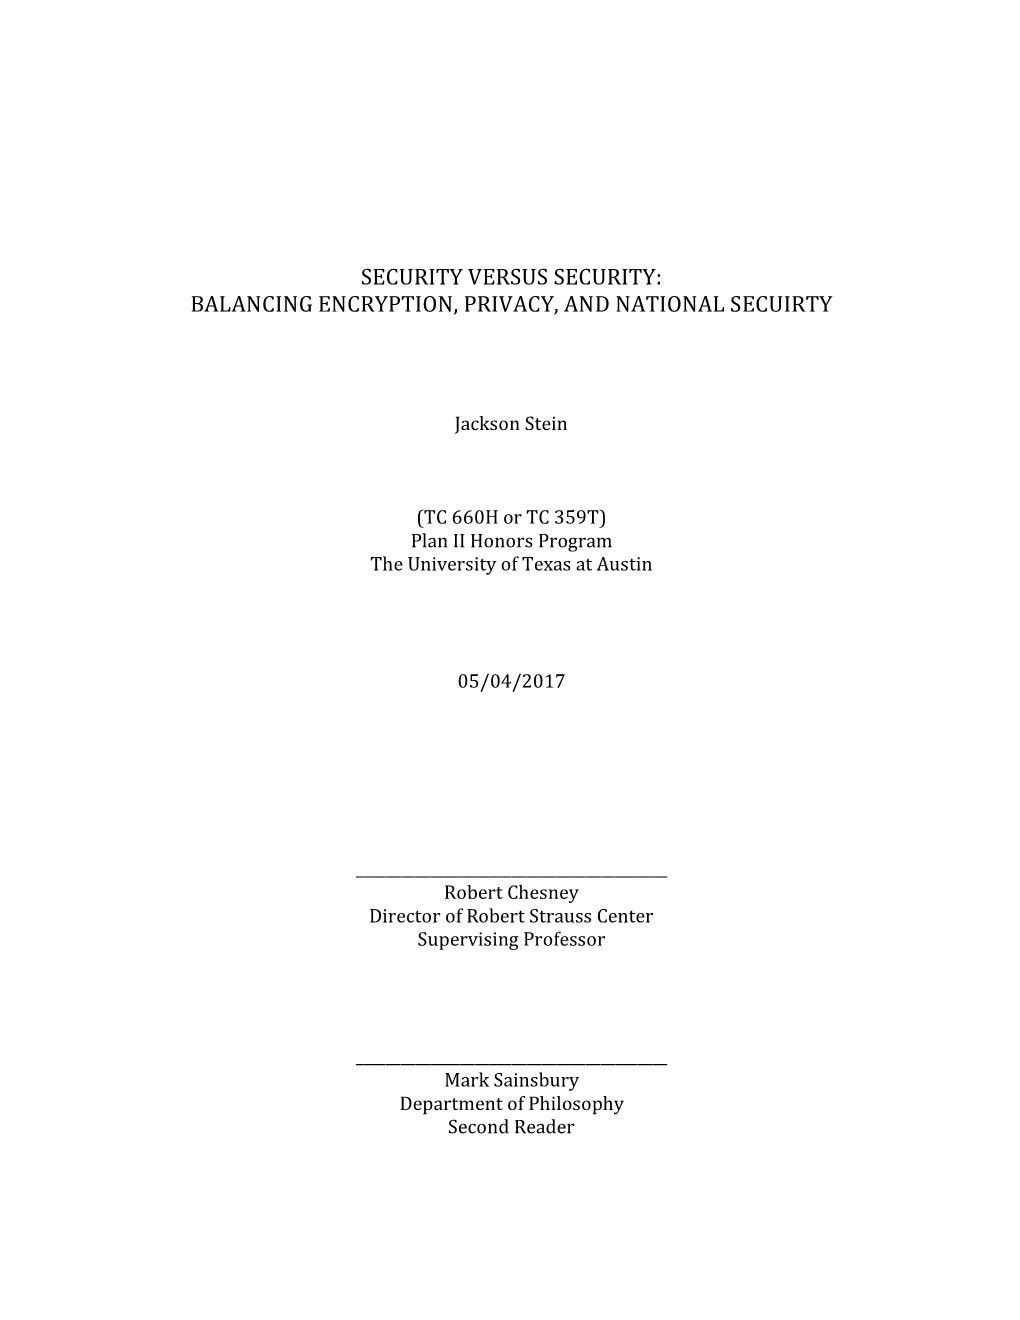 Security Versus Security: Balancing Encryption, Privacy, and National Secuirty